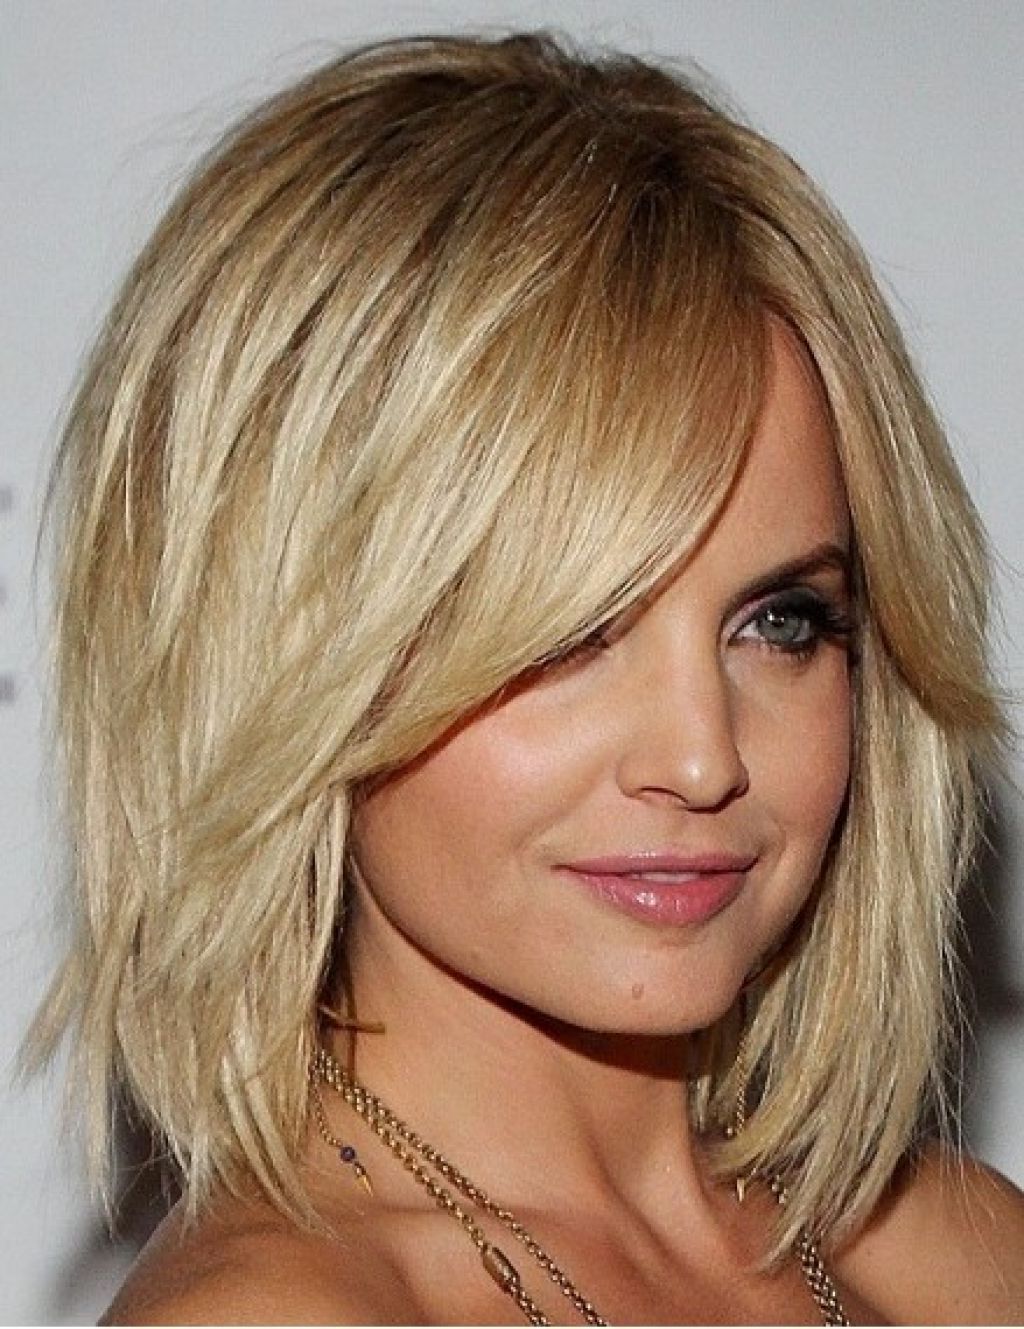 Choppy Bob Style For Mid Length Hair On Women (View 10 of 20)